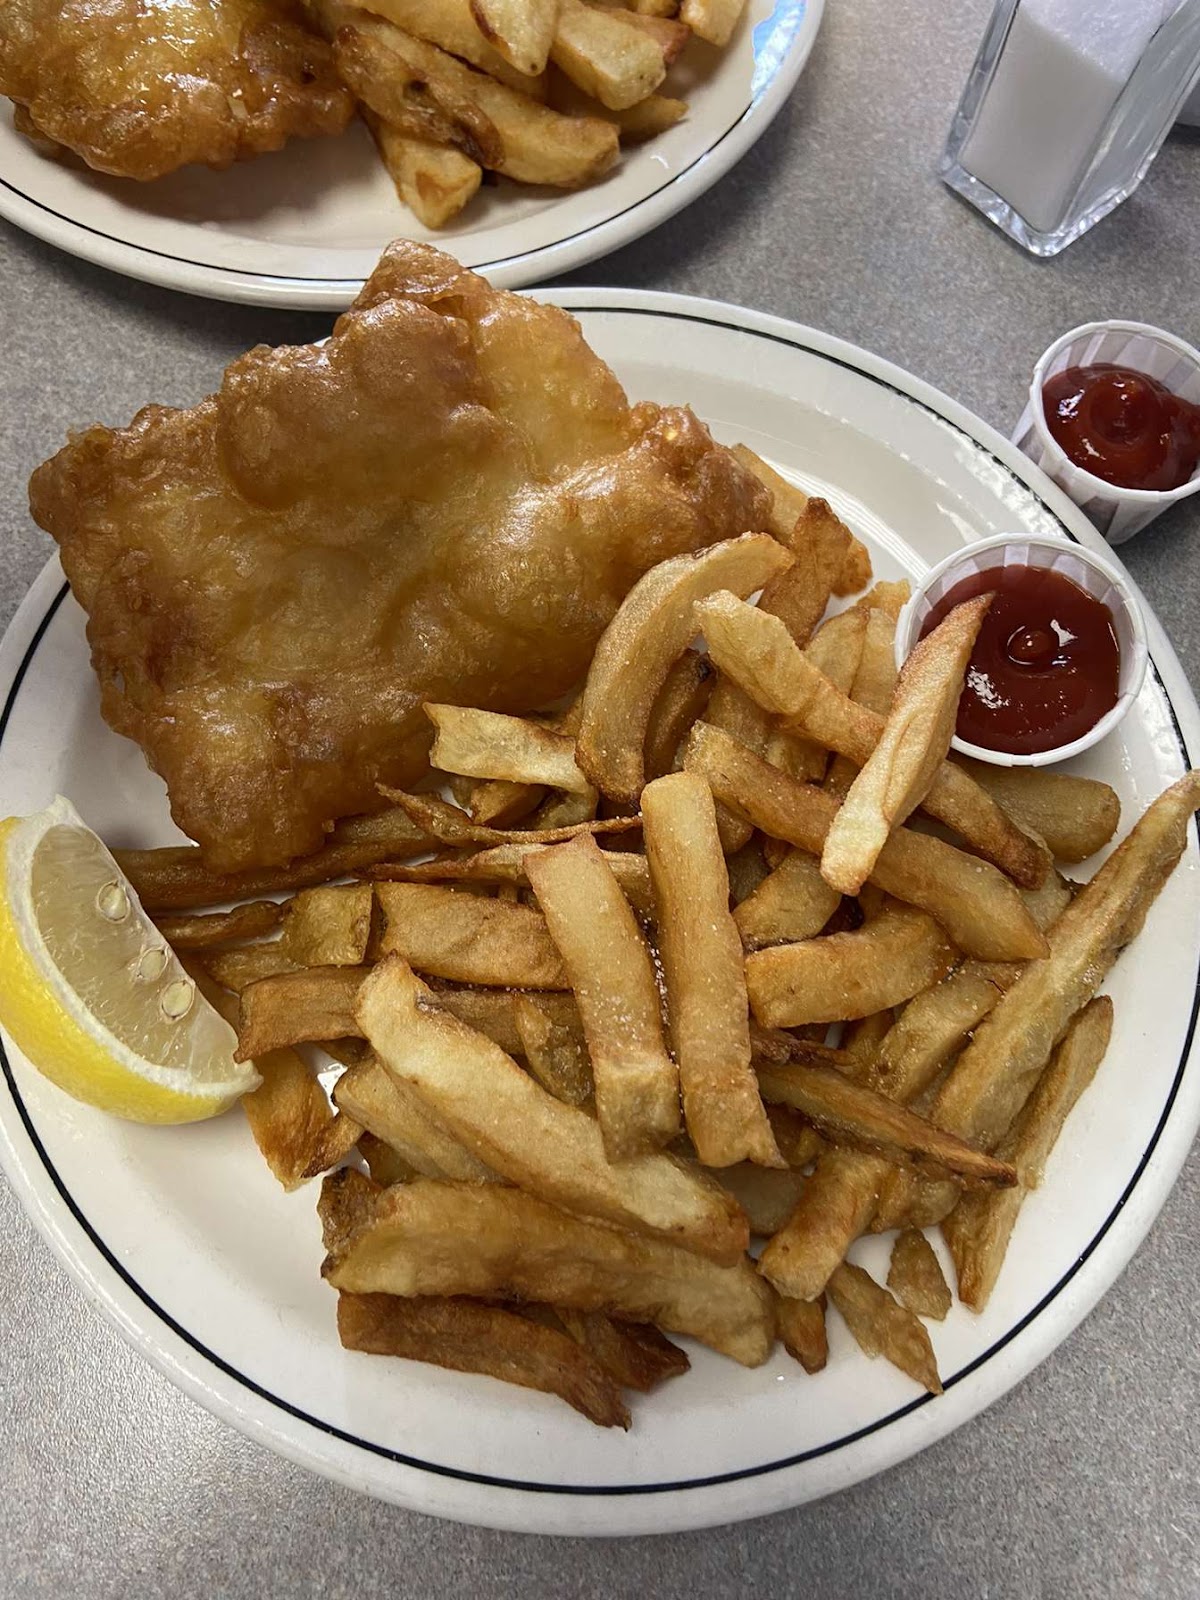 Your Fish & Chips Restaurant